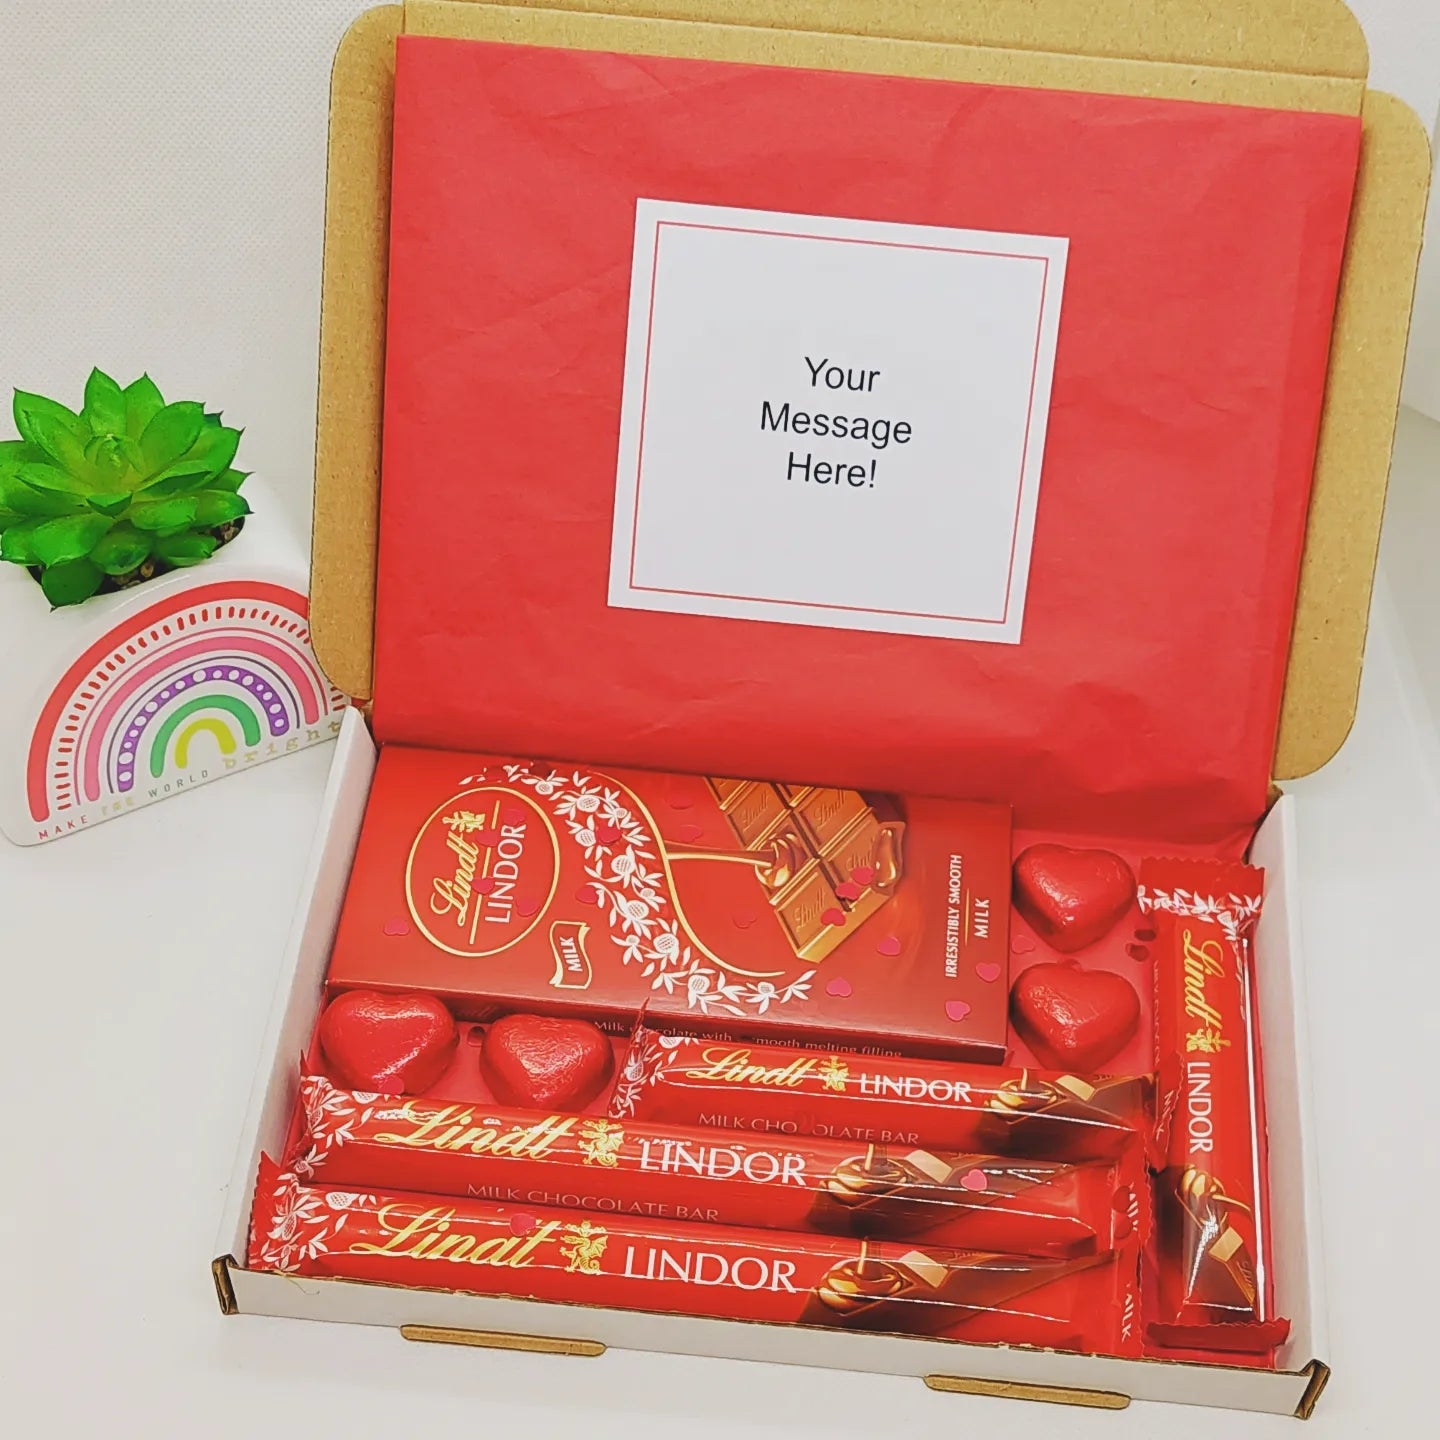 Lindt Gift Box – The Happiness Box